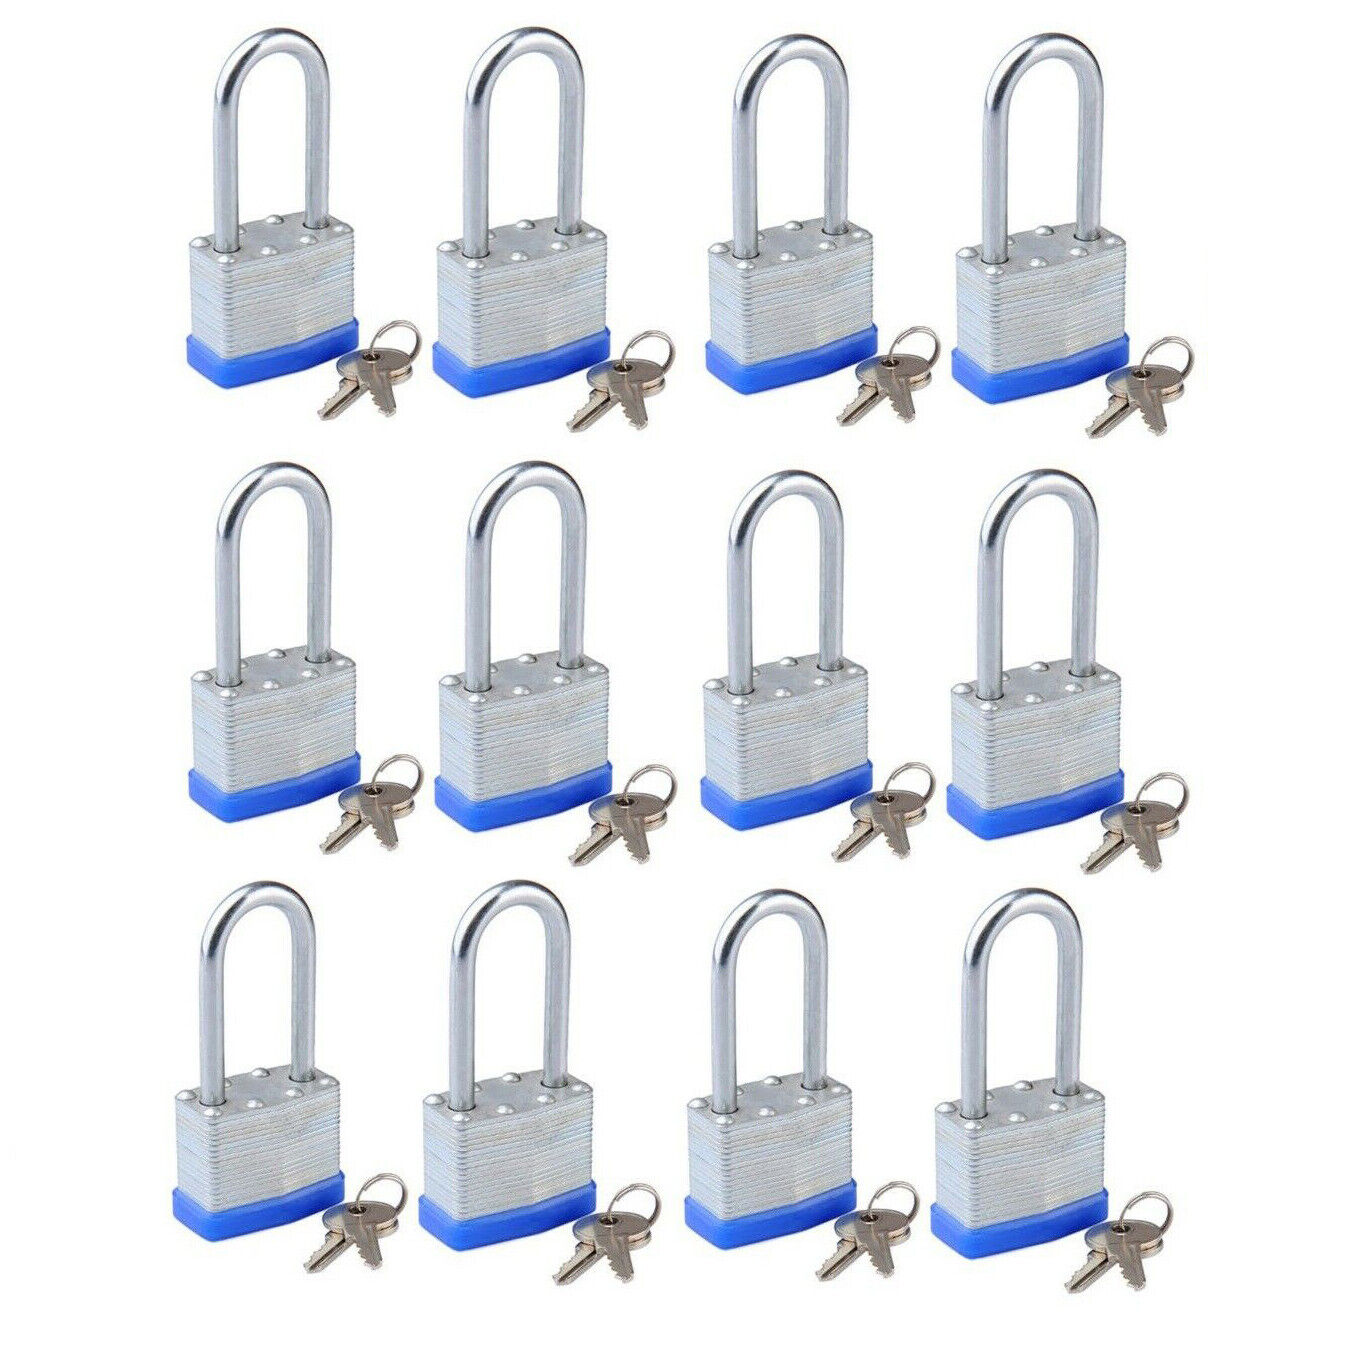 Lot of 12 Piece 40mm Laminated Pad Locks Keyed the Same Alike Long Shackle  artec Does Not Apply